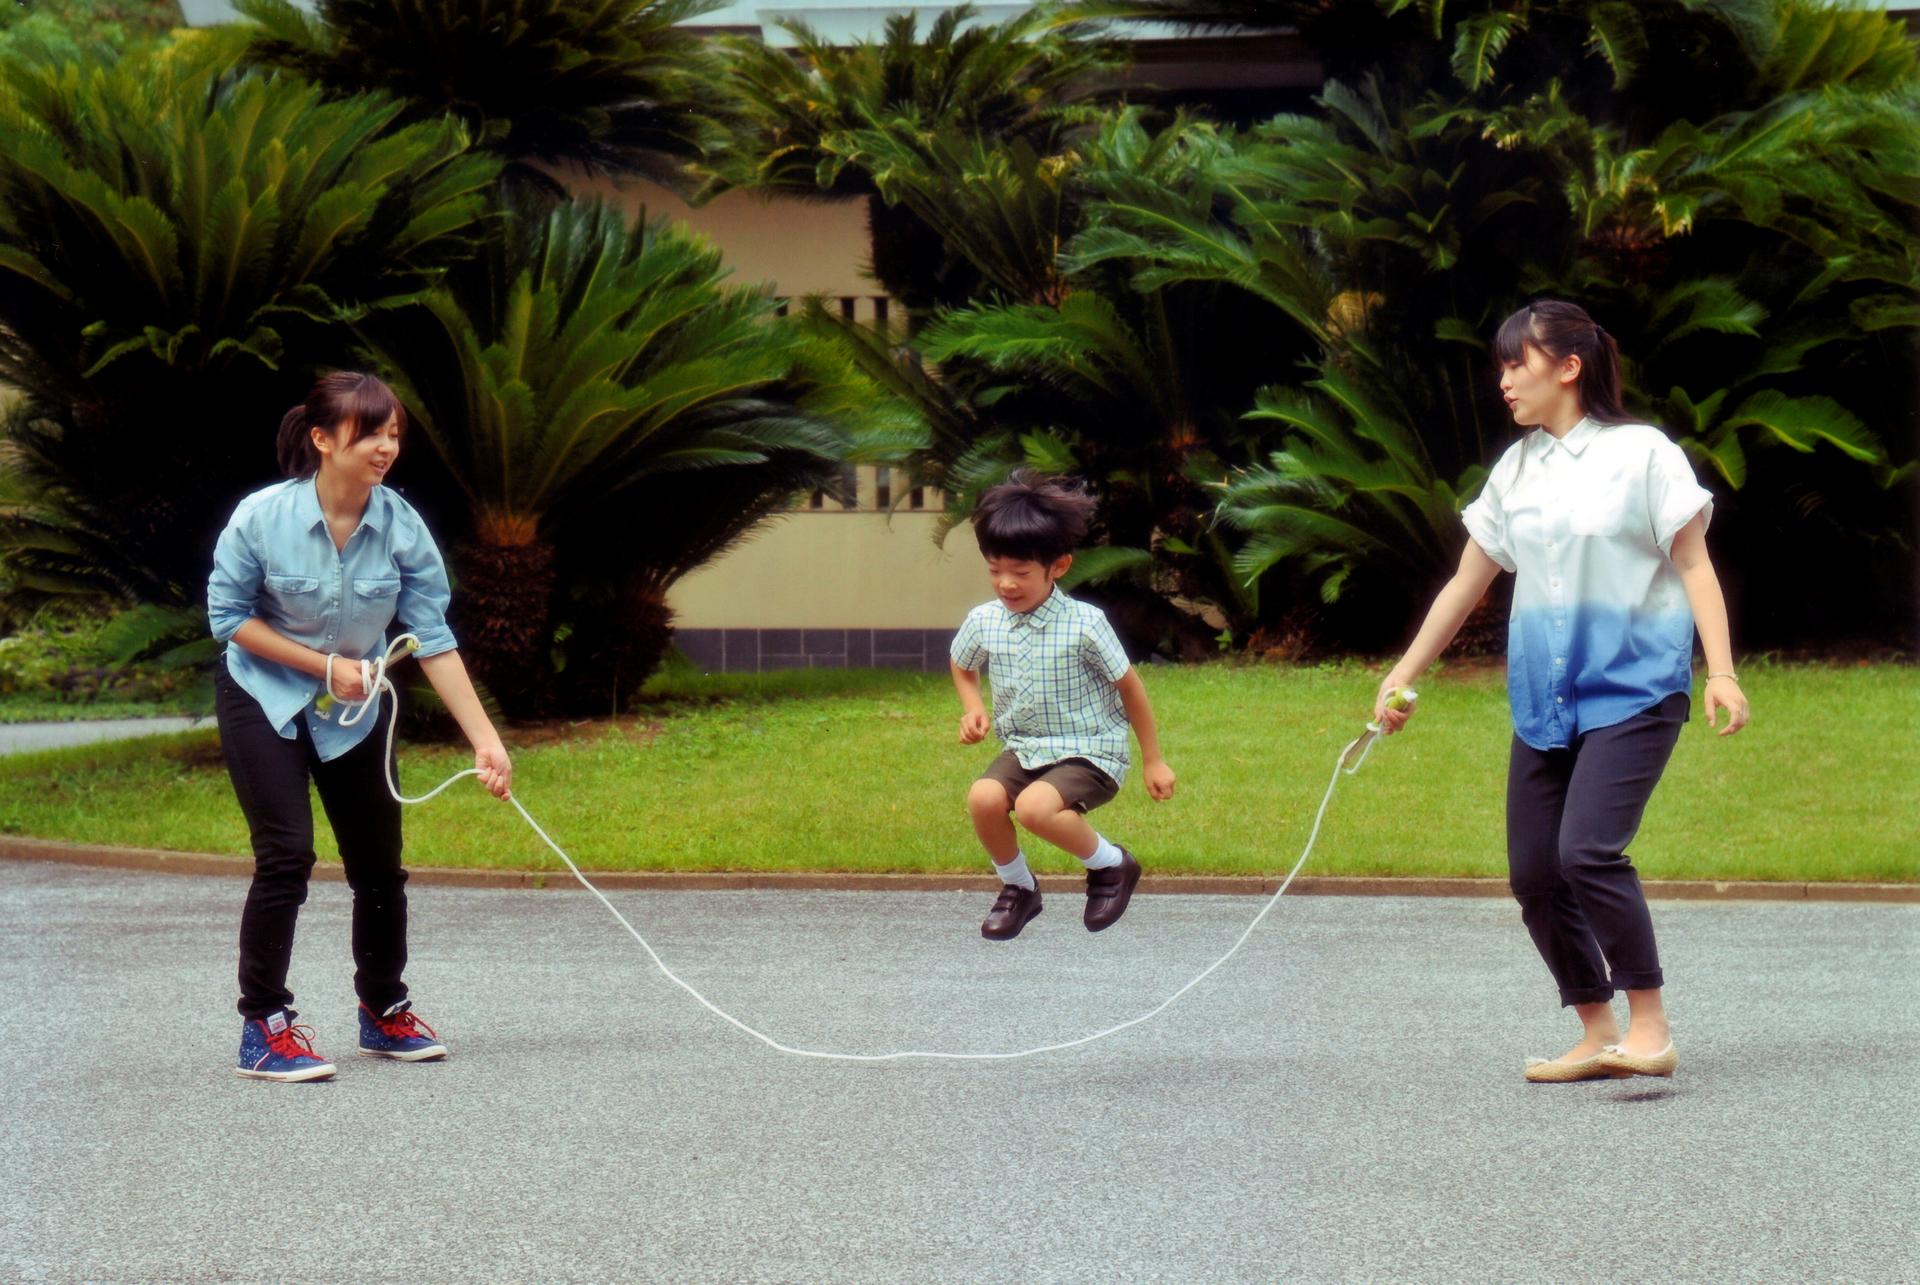 A young boy jumps rope that two young girls are swinging